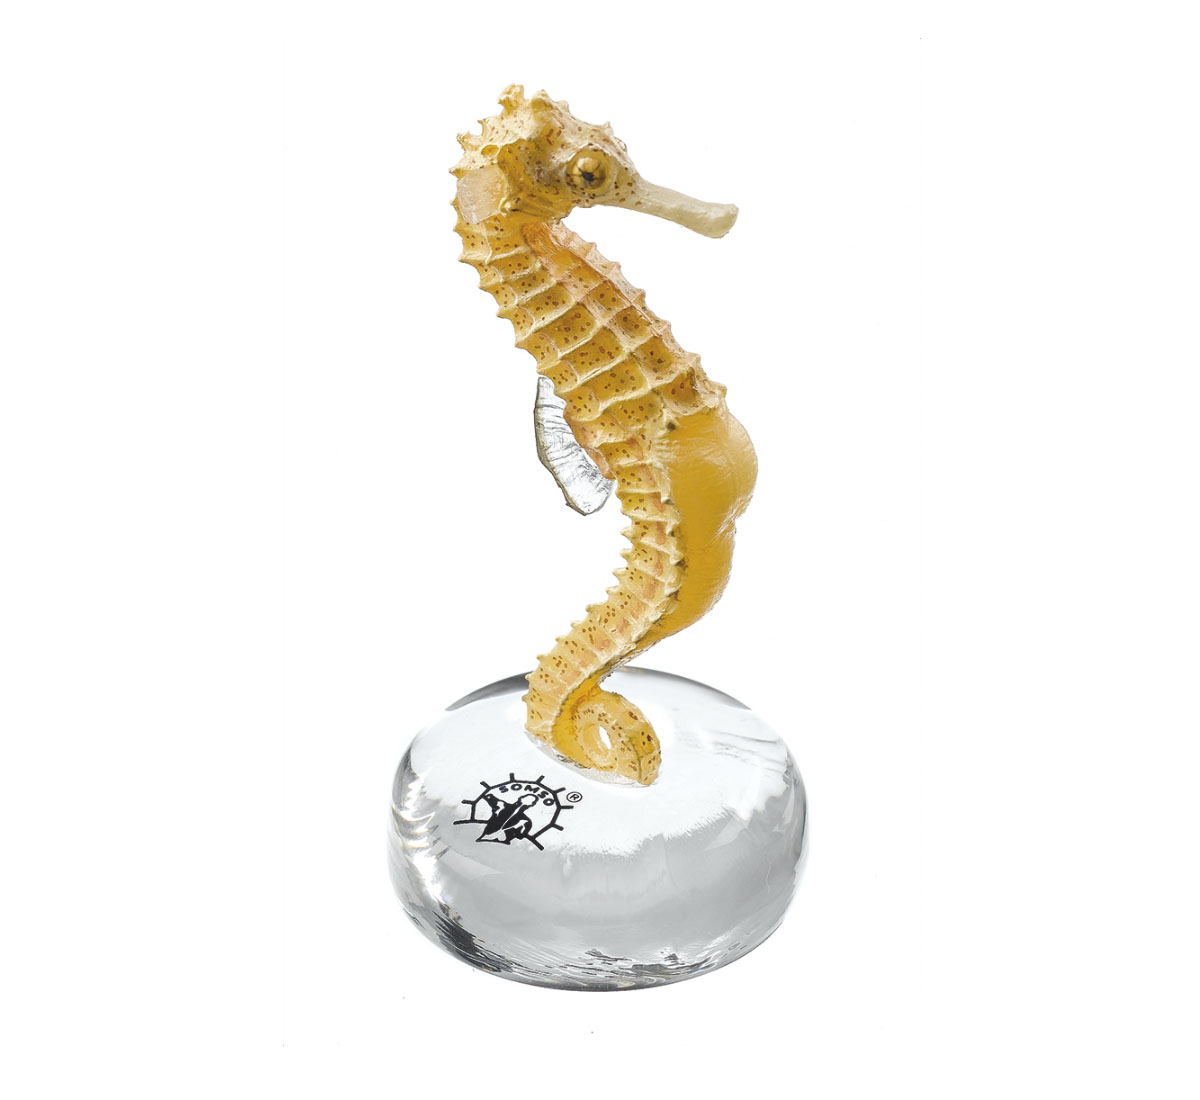 Long-snouted Seahorse Without Skin Filaments (Lobes, Filaments), Male